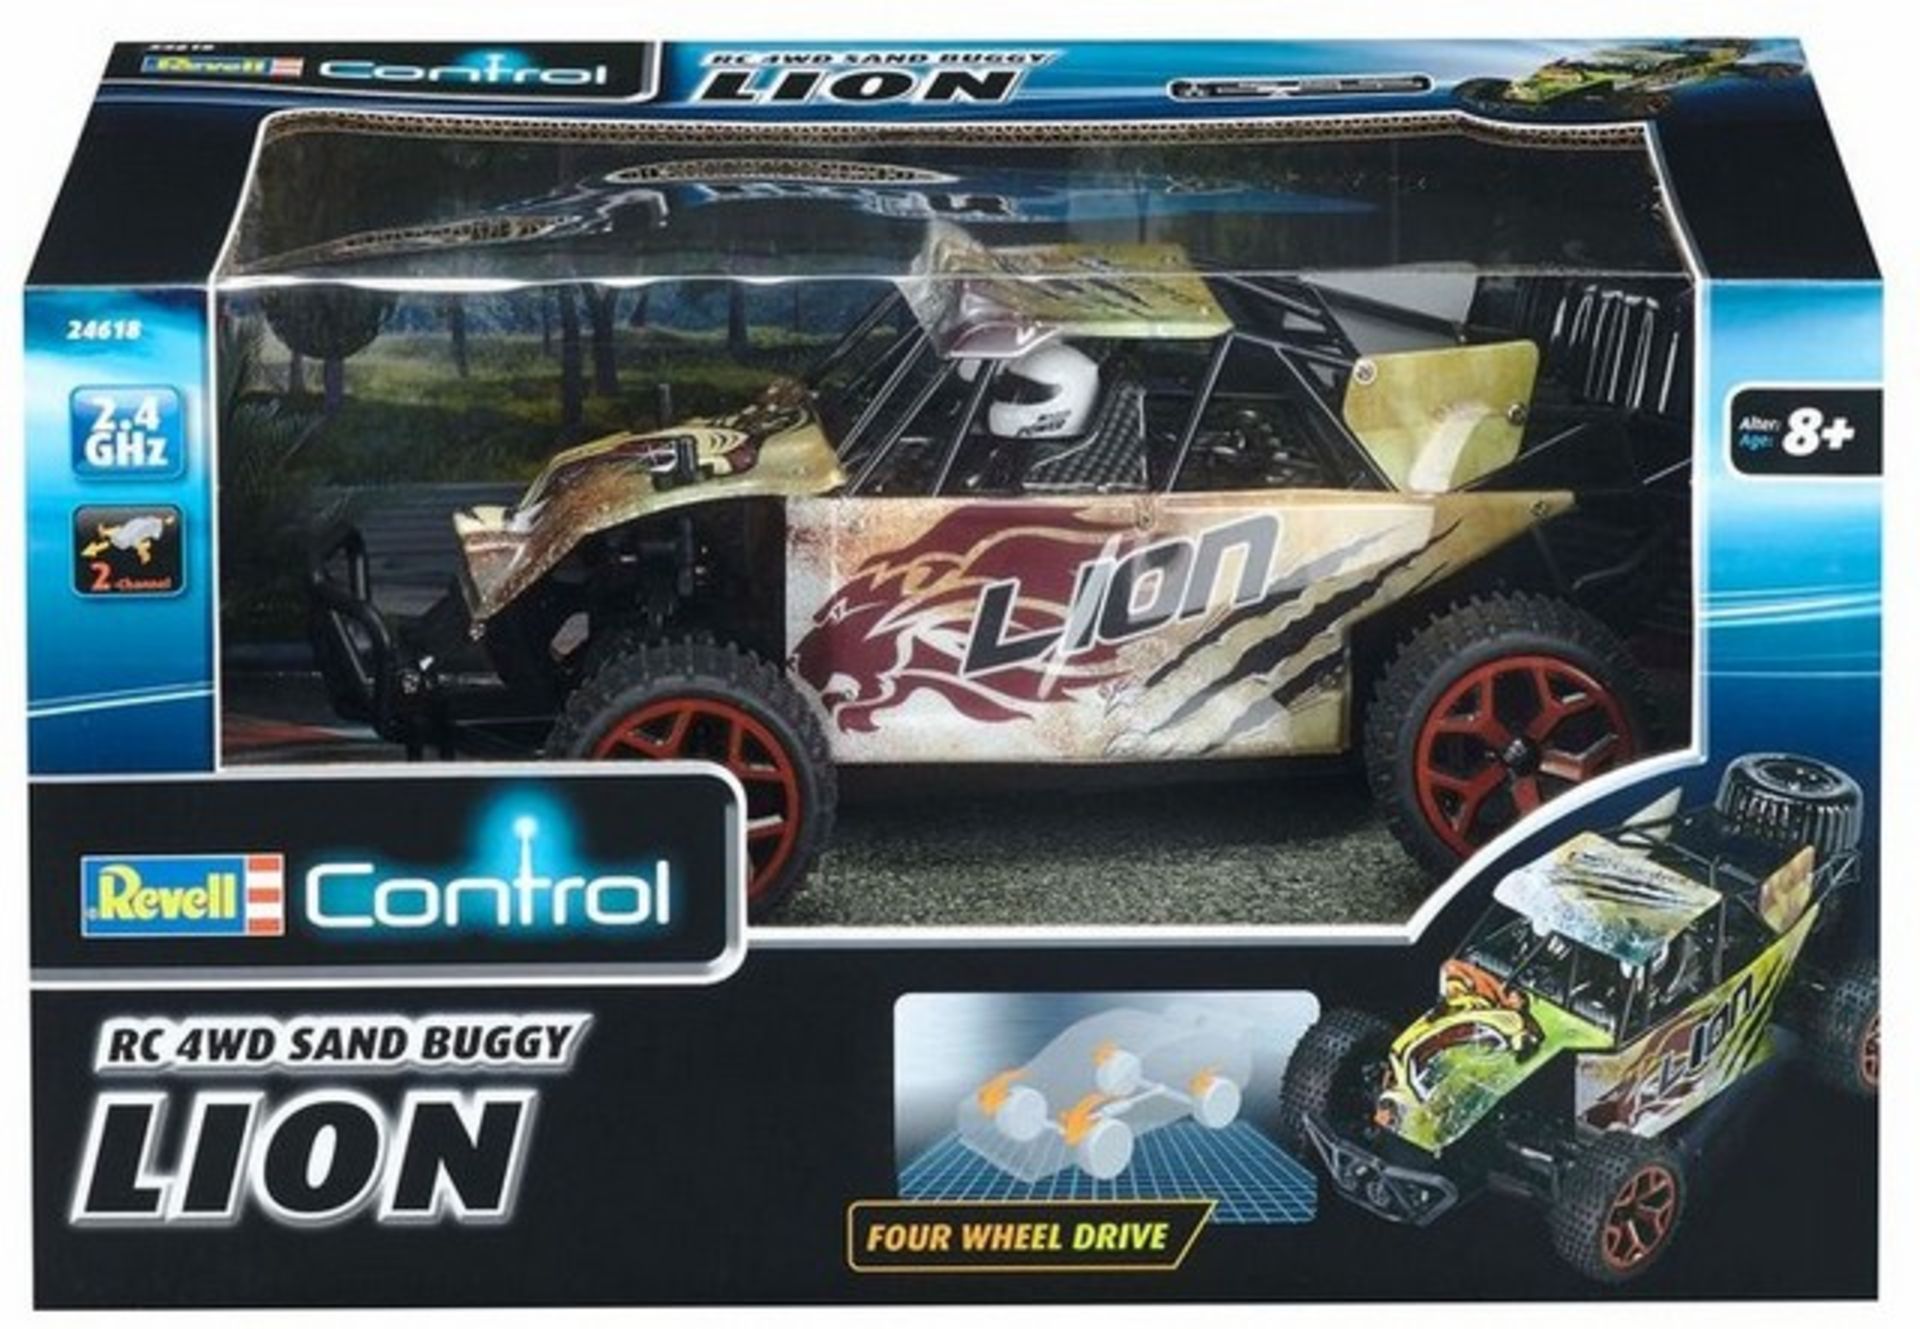 + VAT Brand New Revell R/C 4 Wheel Drive Sand Buggy Lion Up To 15 kph 2.4GHz 2 Channel Remote - Image 2 of 2